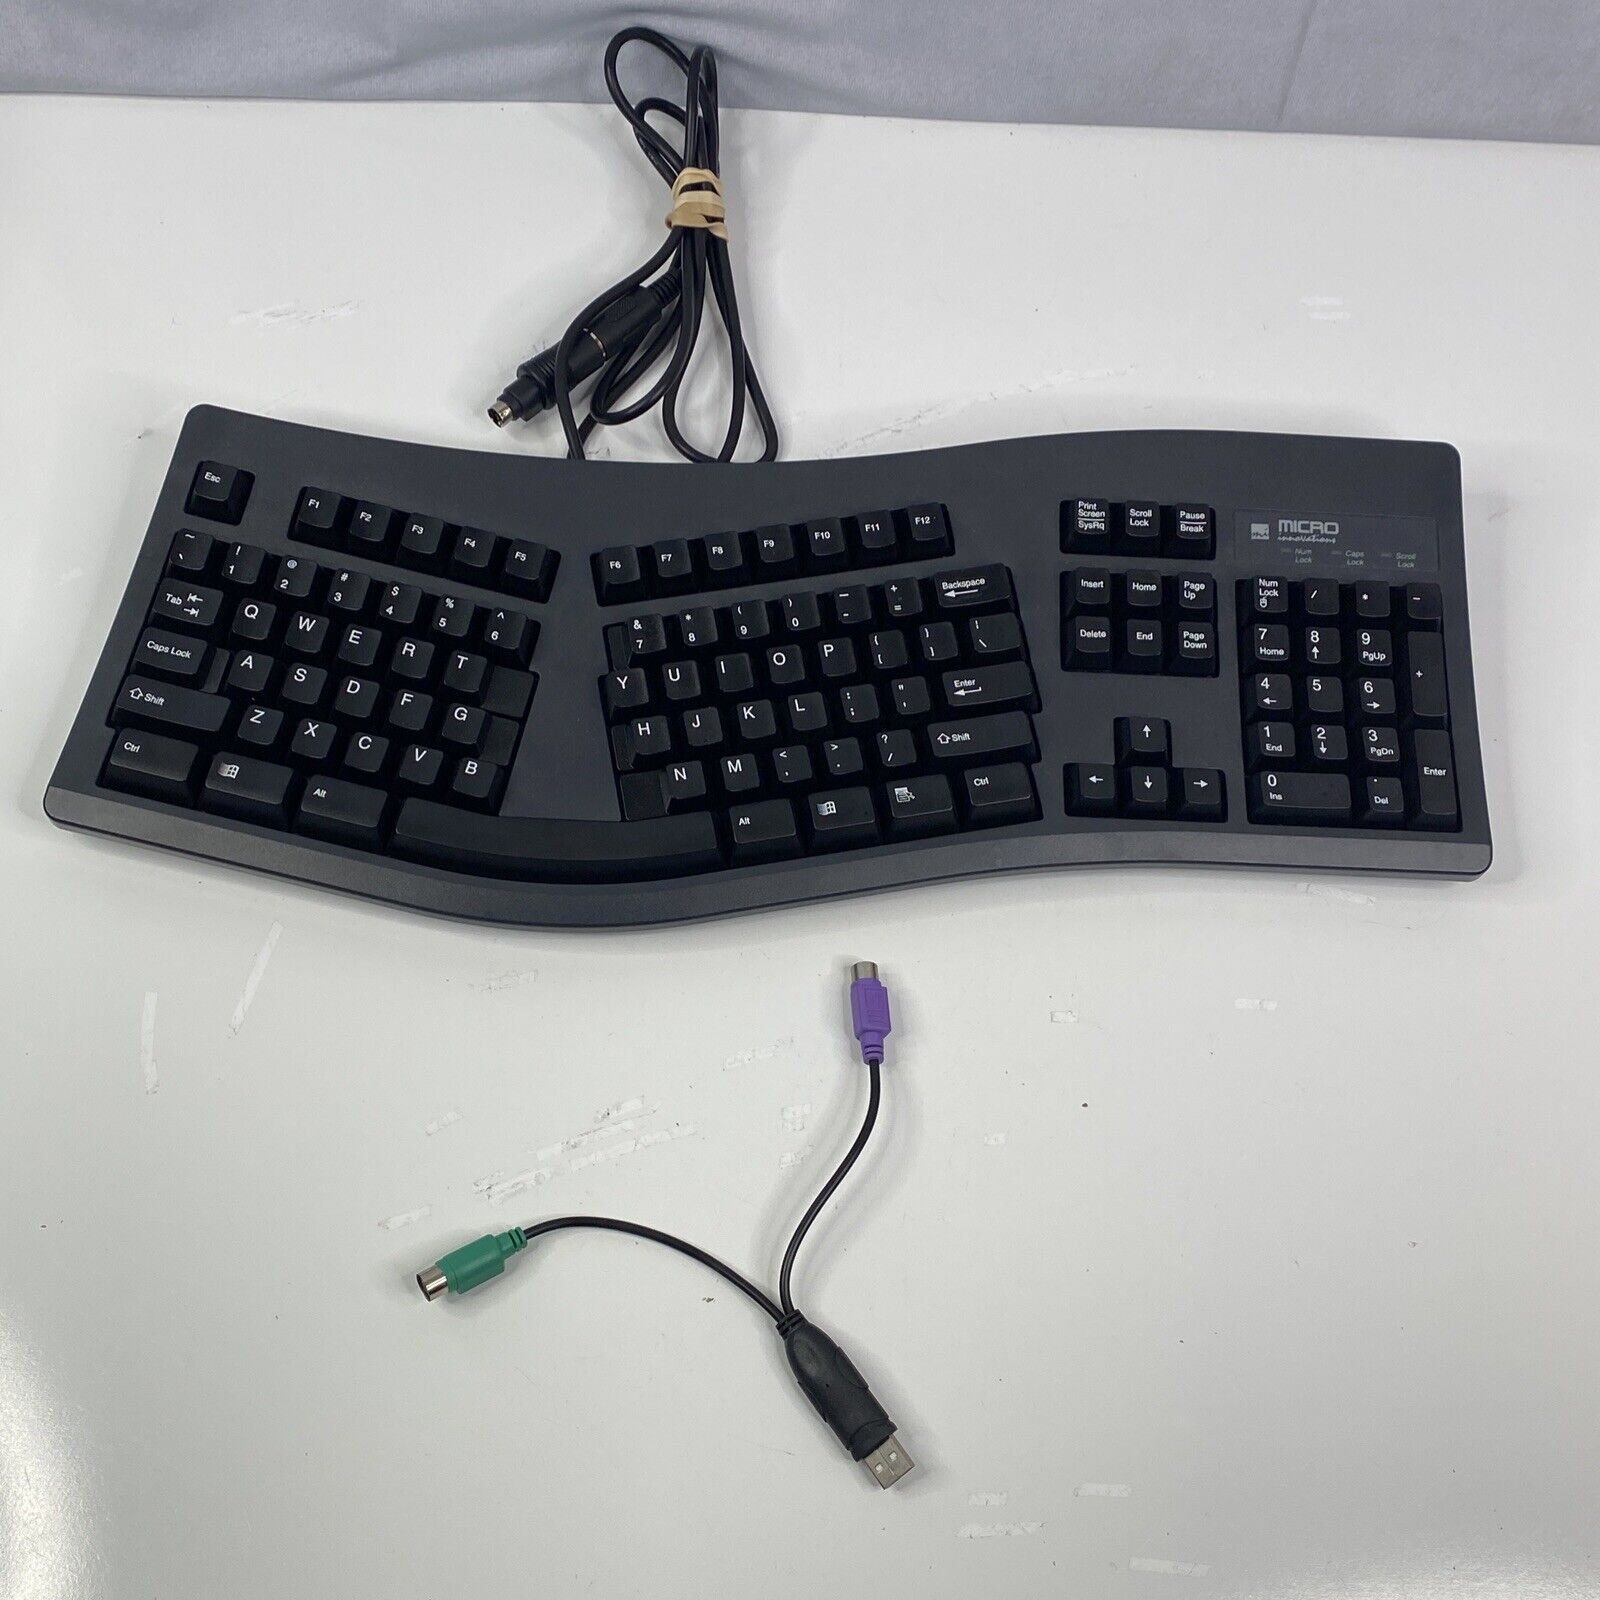 Micro Innovations AT Black Keyboard KB-7903 Ergonomic 5 Pin DIN with Adapter